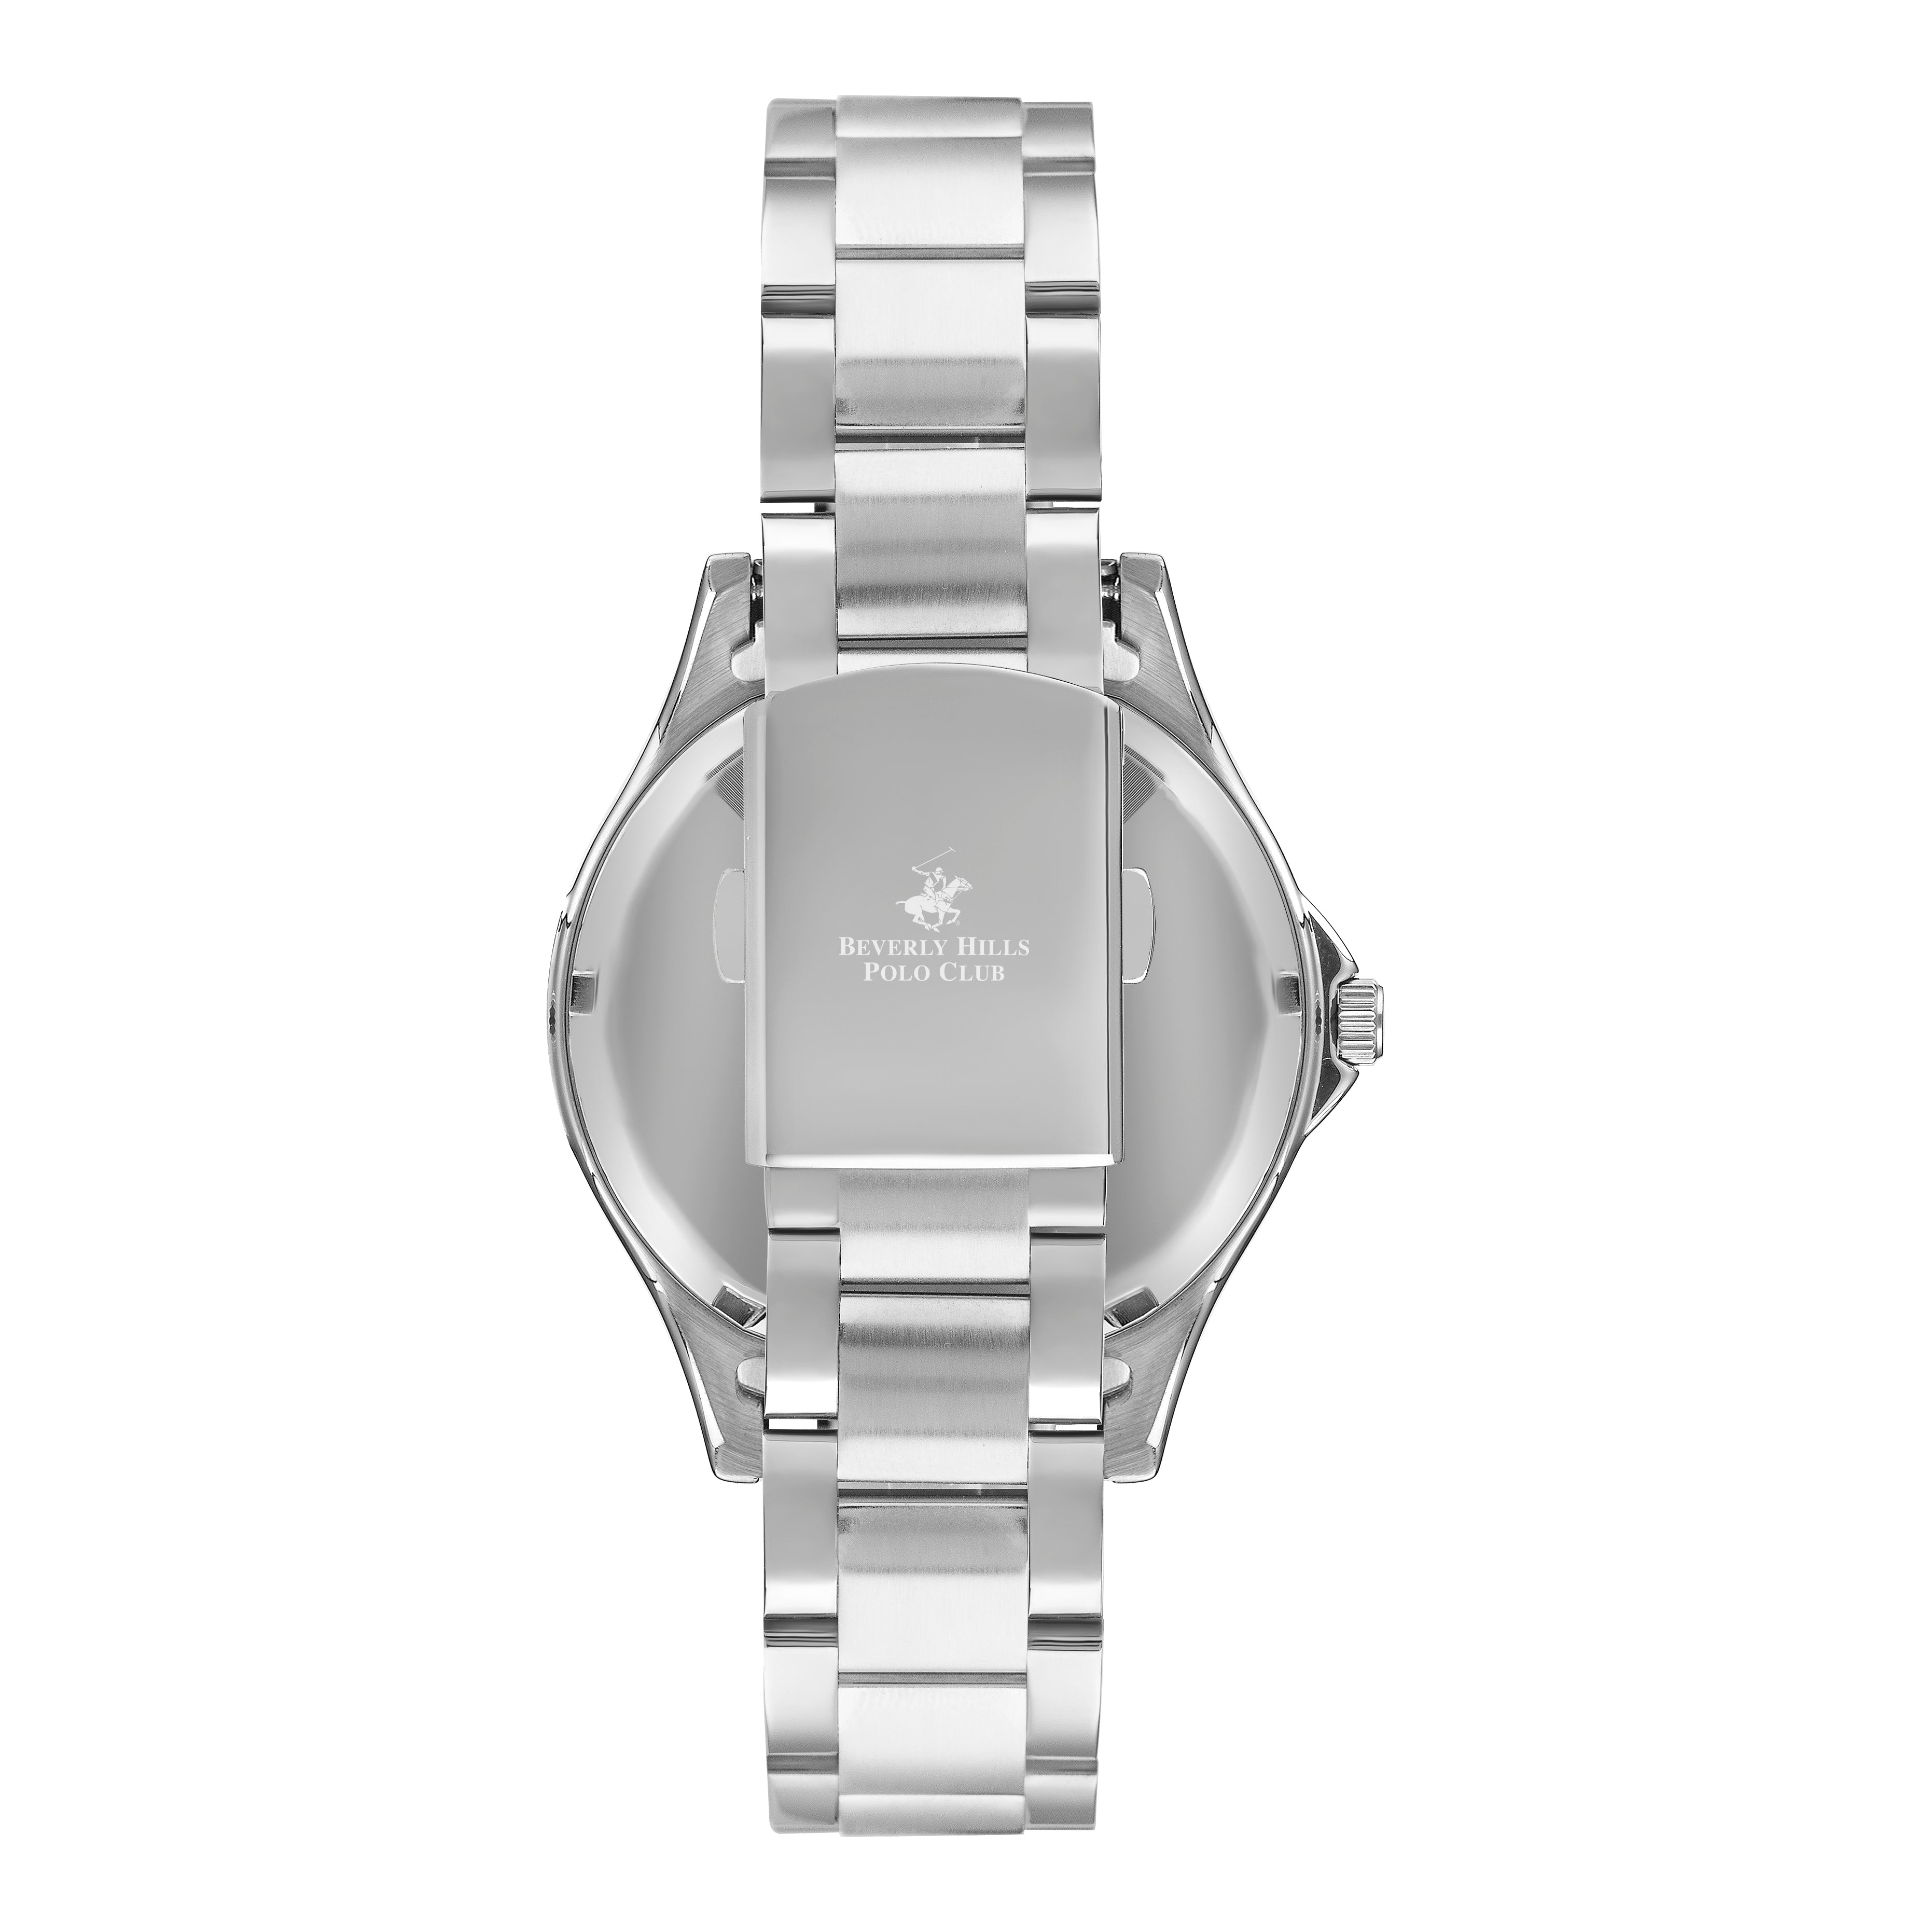 Polo - BP3239X.390 - Mens Stainless Steel Watch